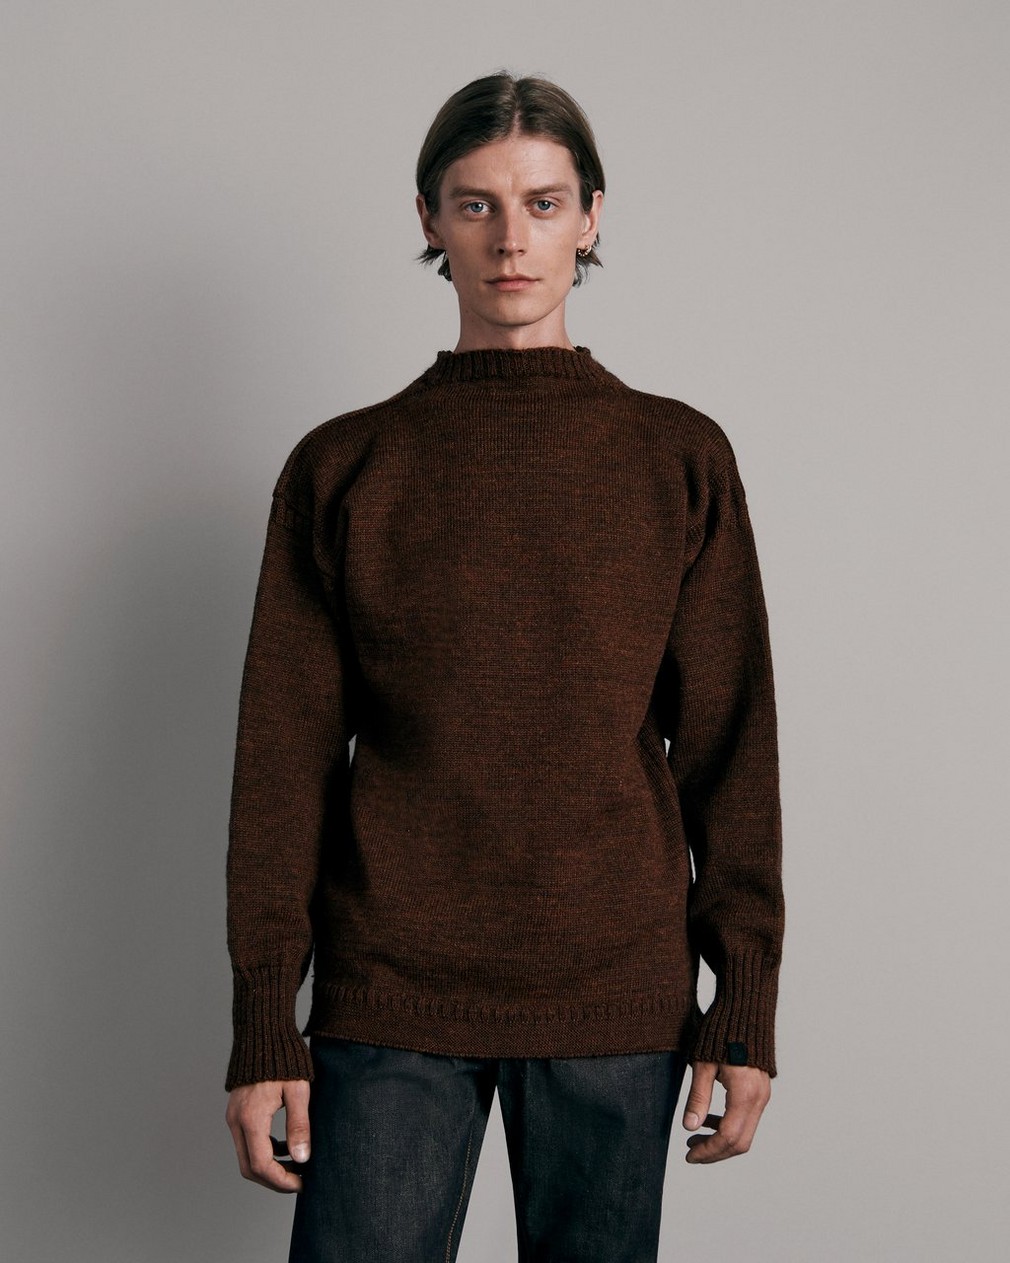 The Guernsey Wool Sweater